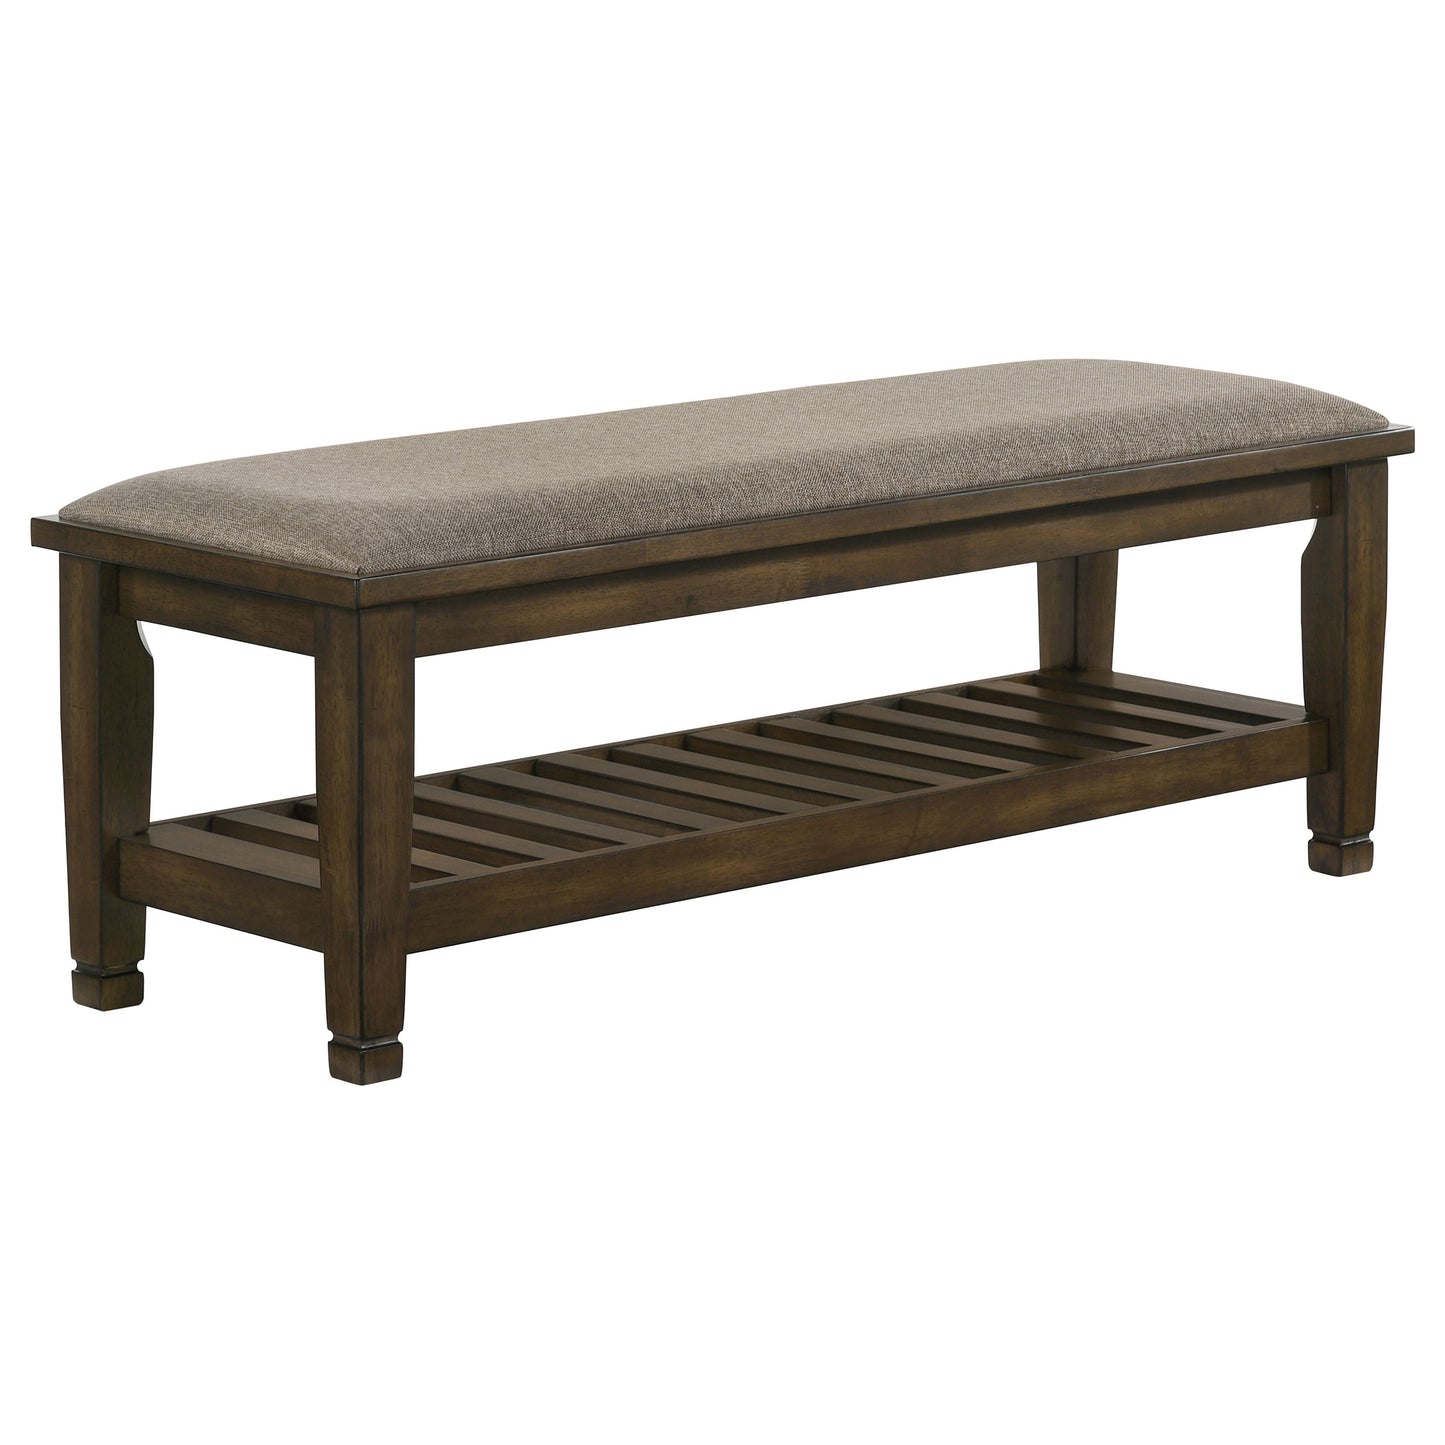 Franco Bench with Lower Shelf Beige and Burnished Oak